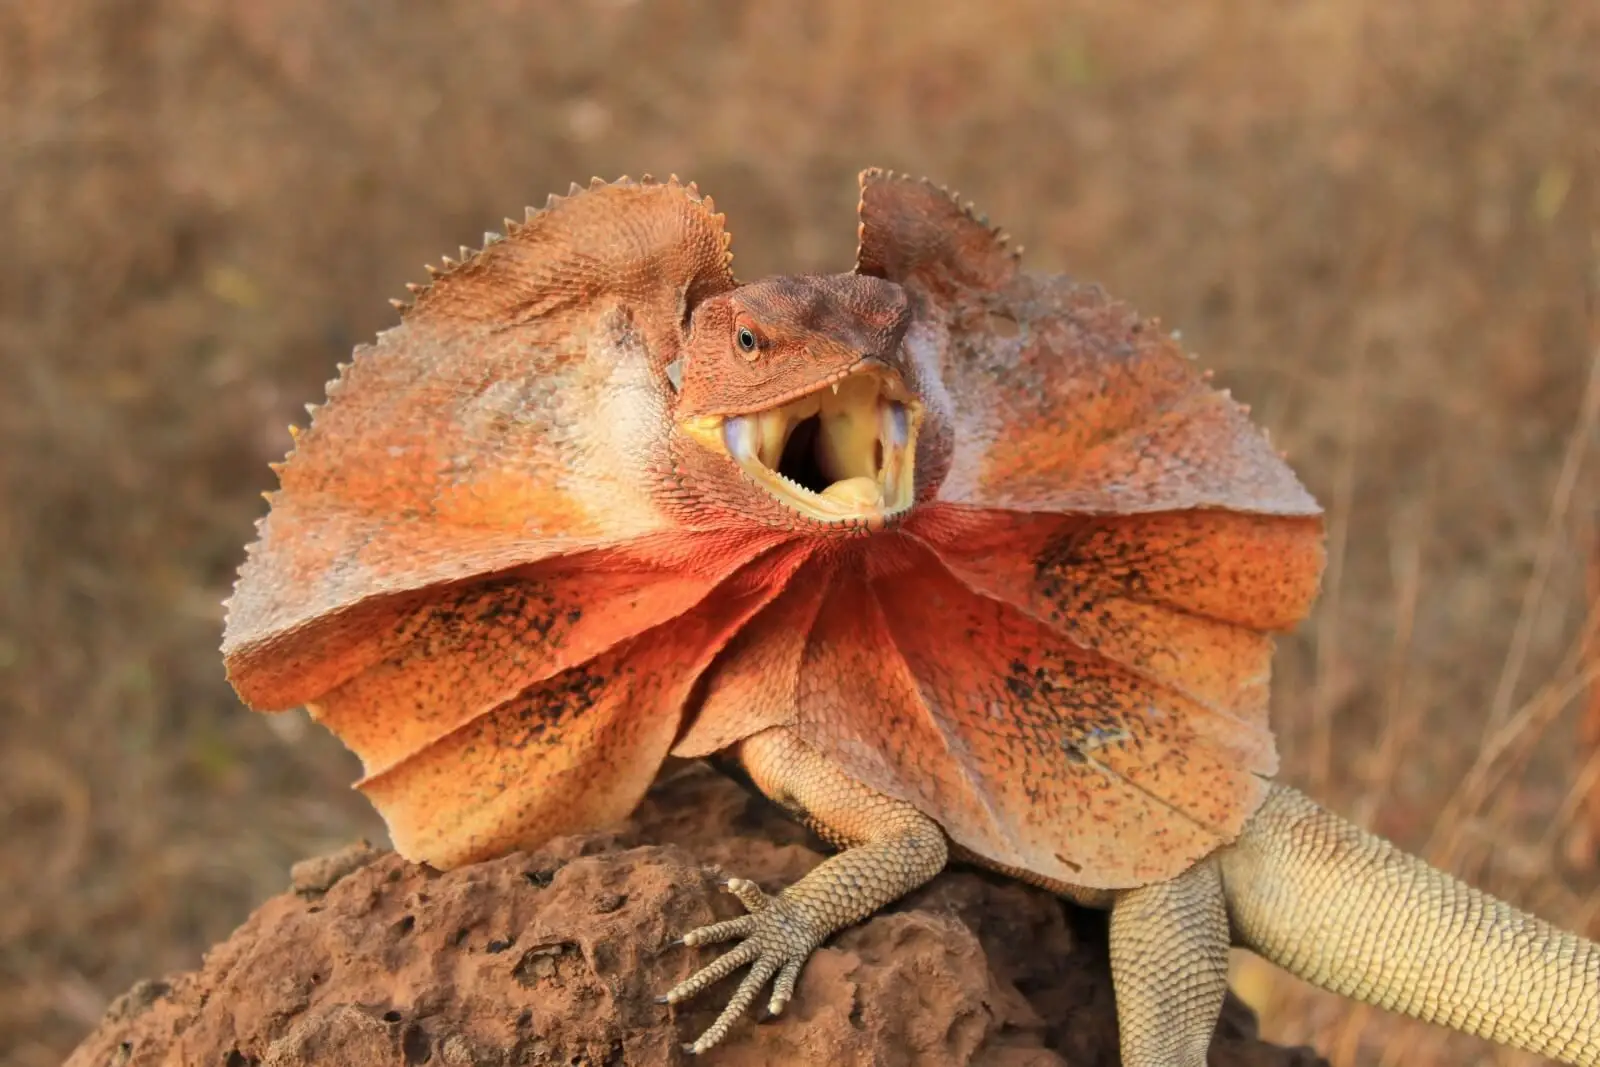 Frill-Necked Lizards (Frilled Dragons)